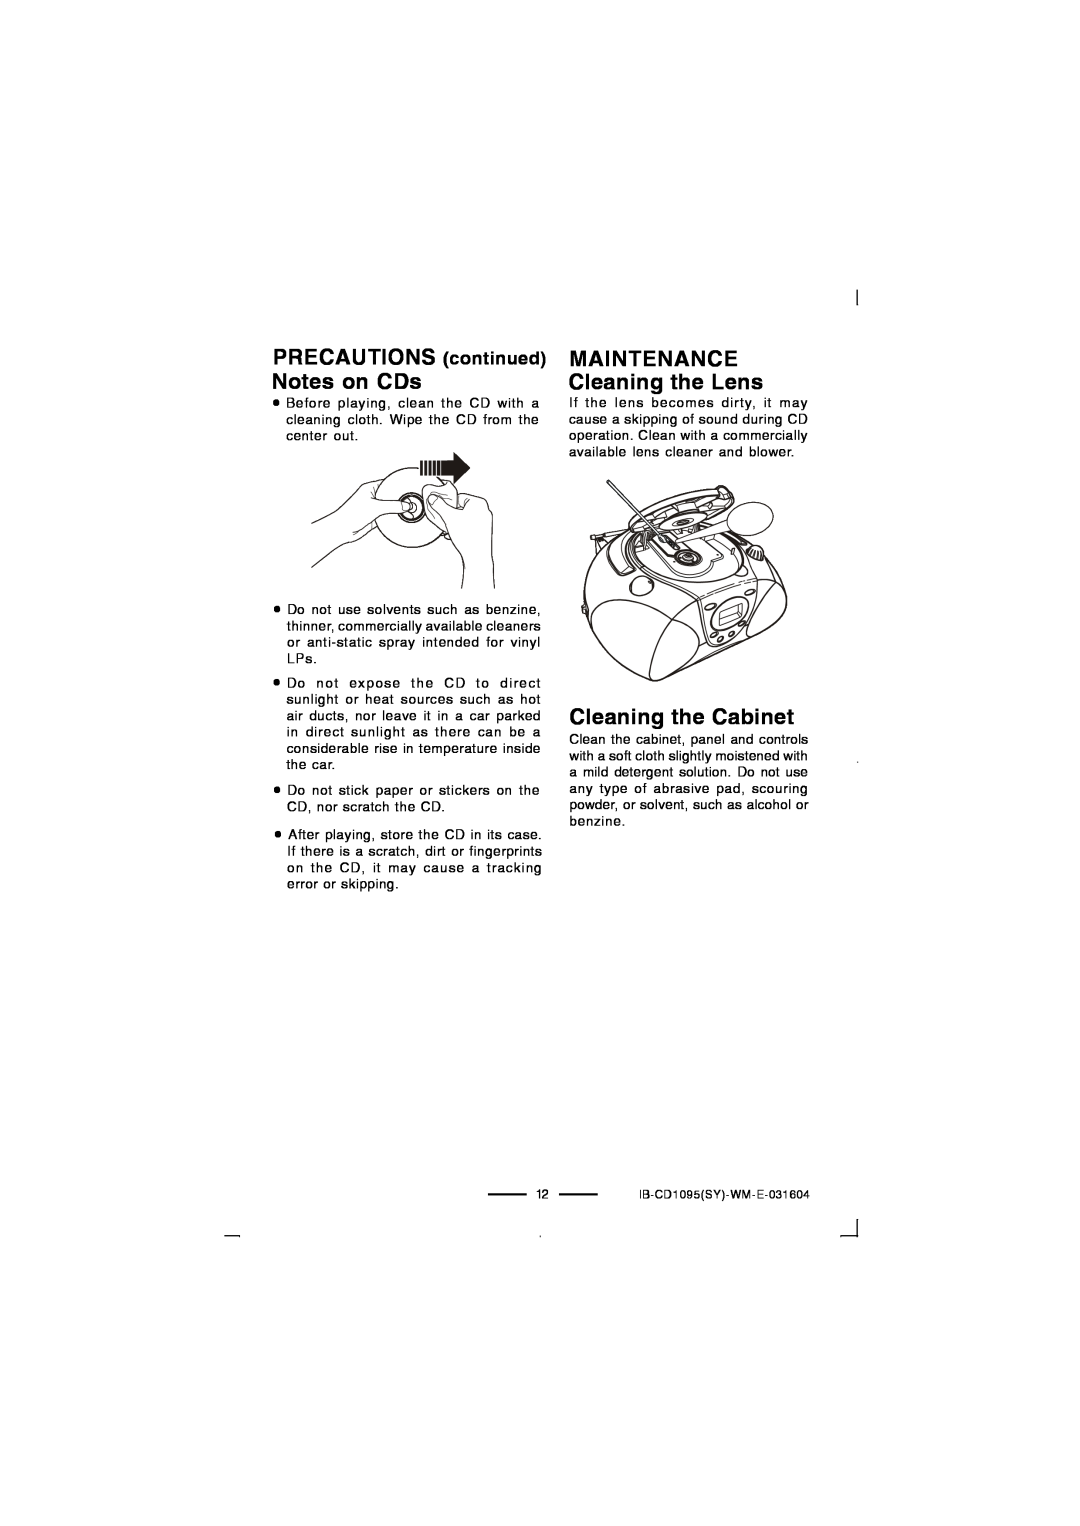 Lenoxx Electronics CD-1095 manual PRECAUTIONS continued Notes on CDs, MAINTENANCE Cleaning the Lens, Cleaning the Cabinet 